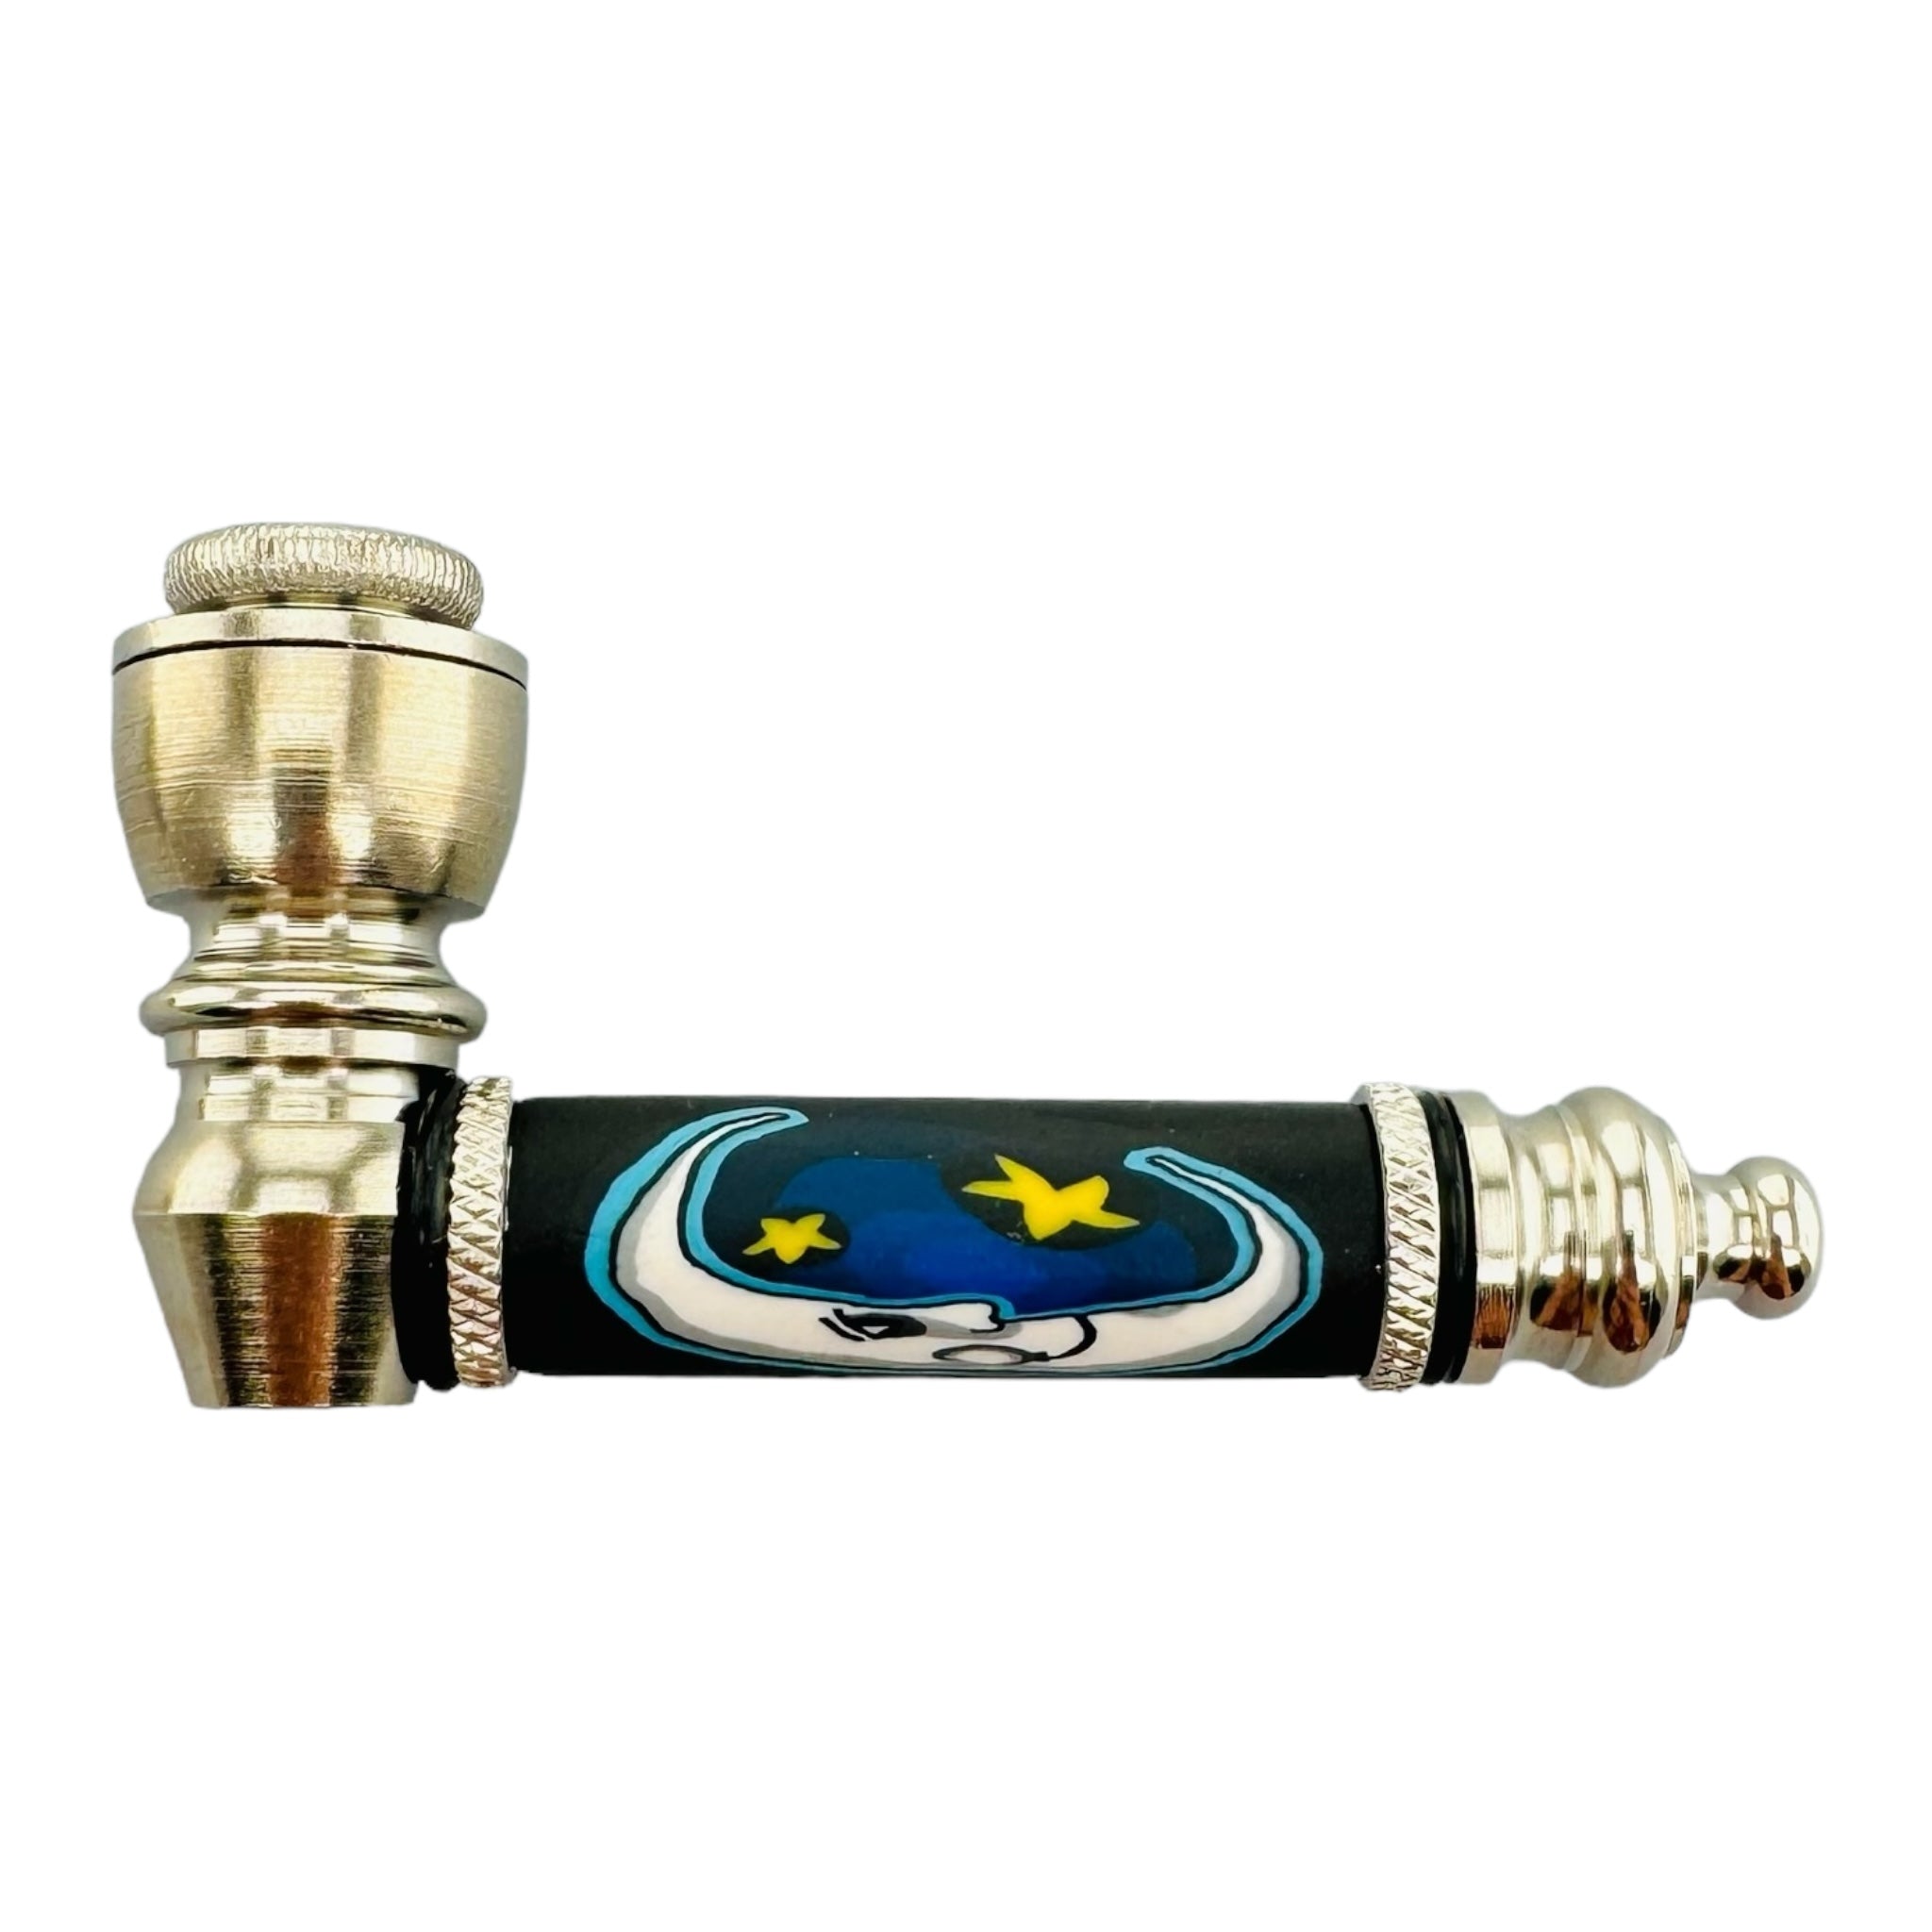 Metal Hand Pipes - Silver Chrome Hand Pipe With Moon And Stars